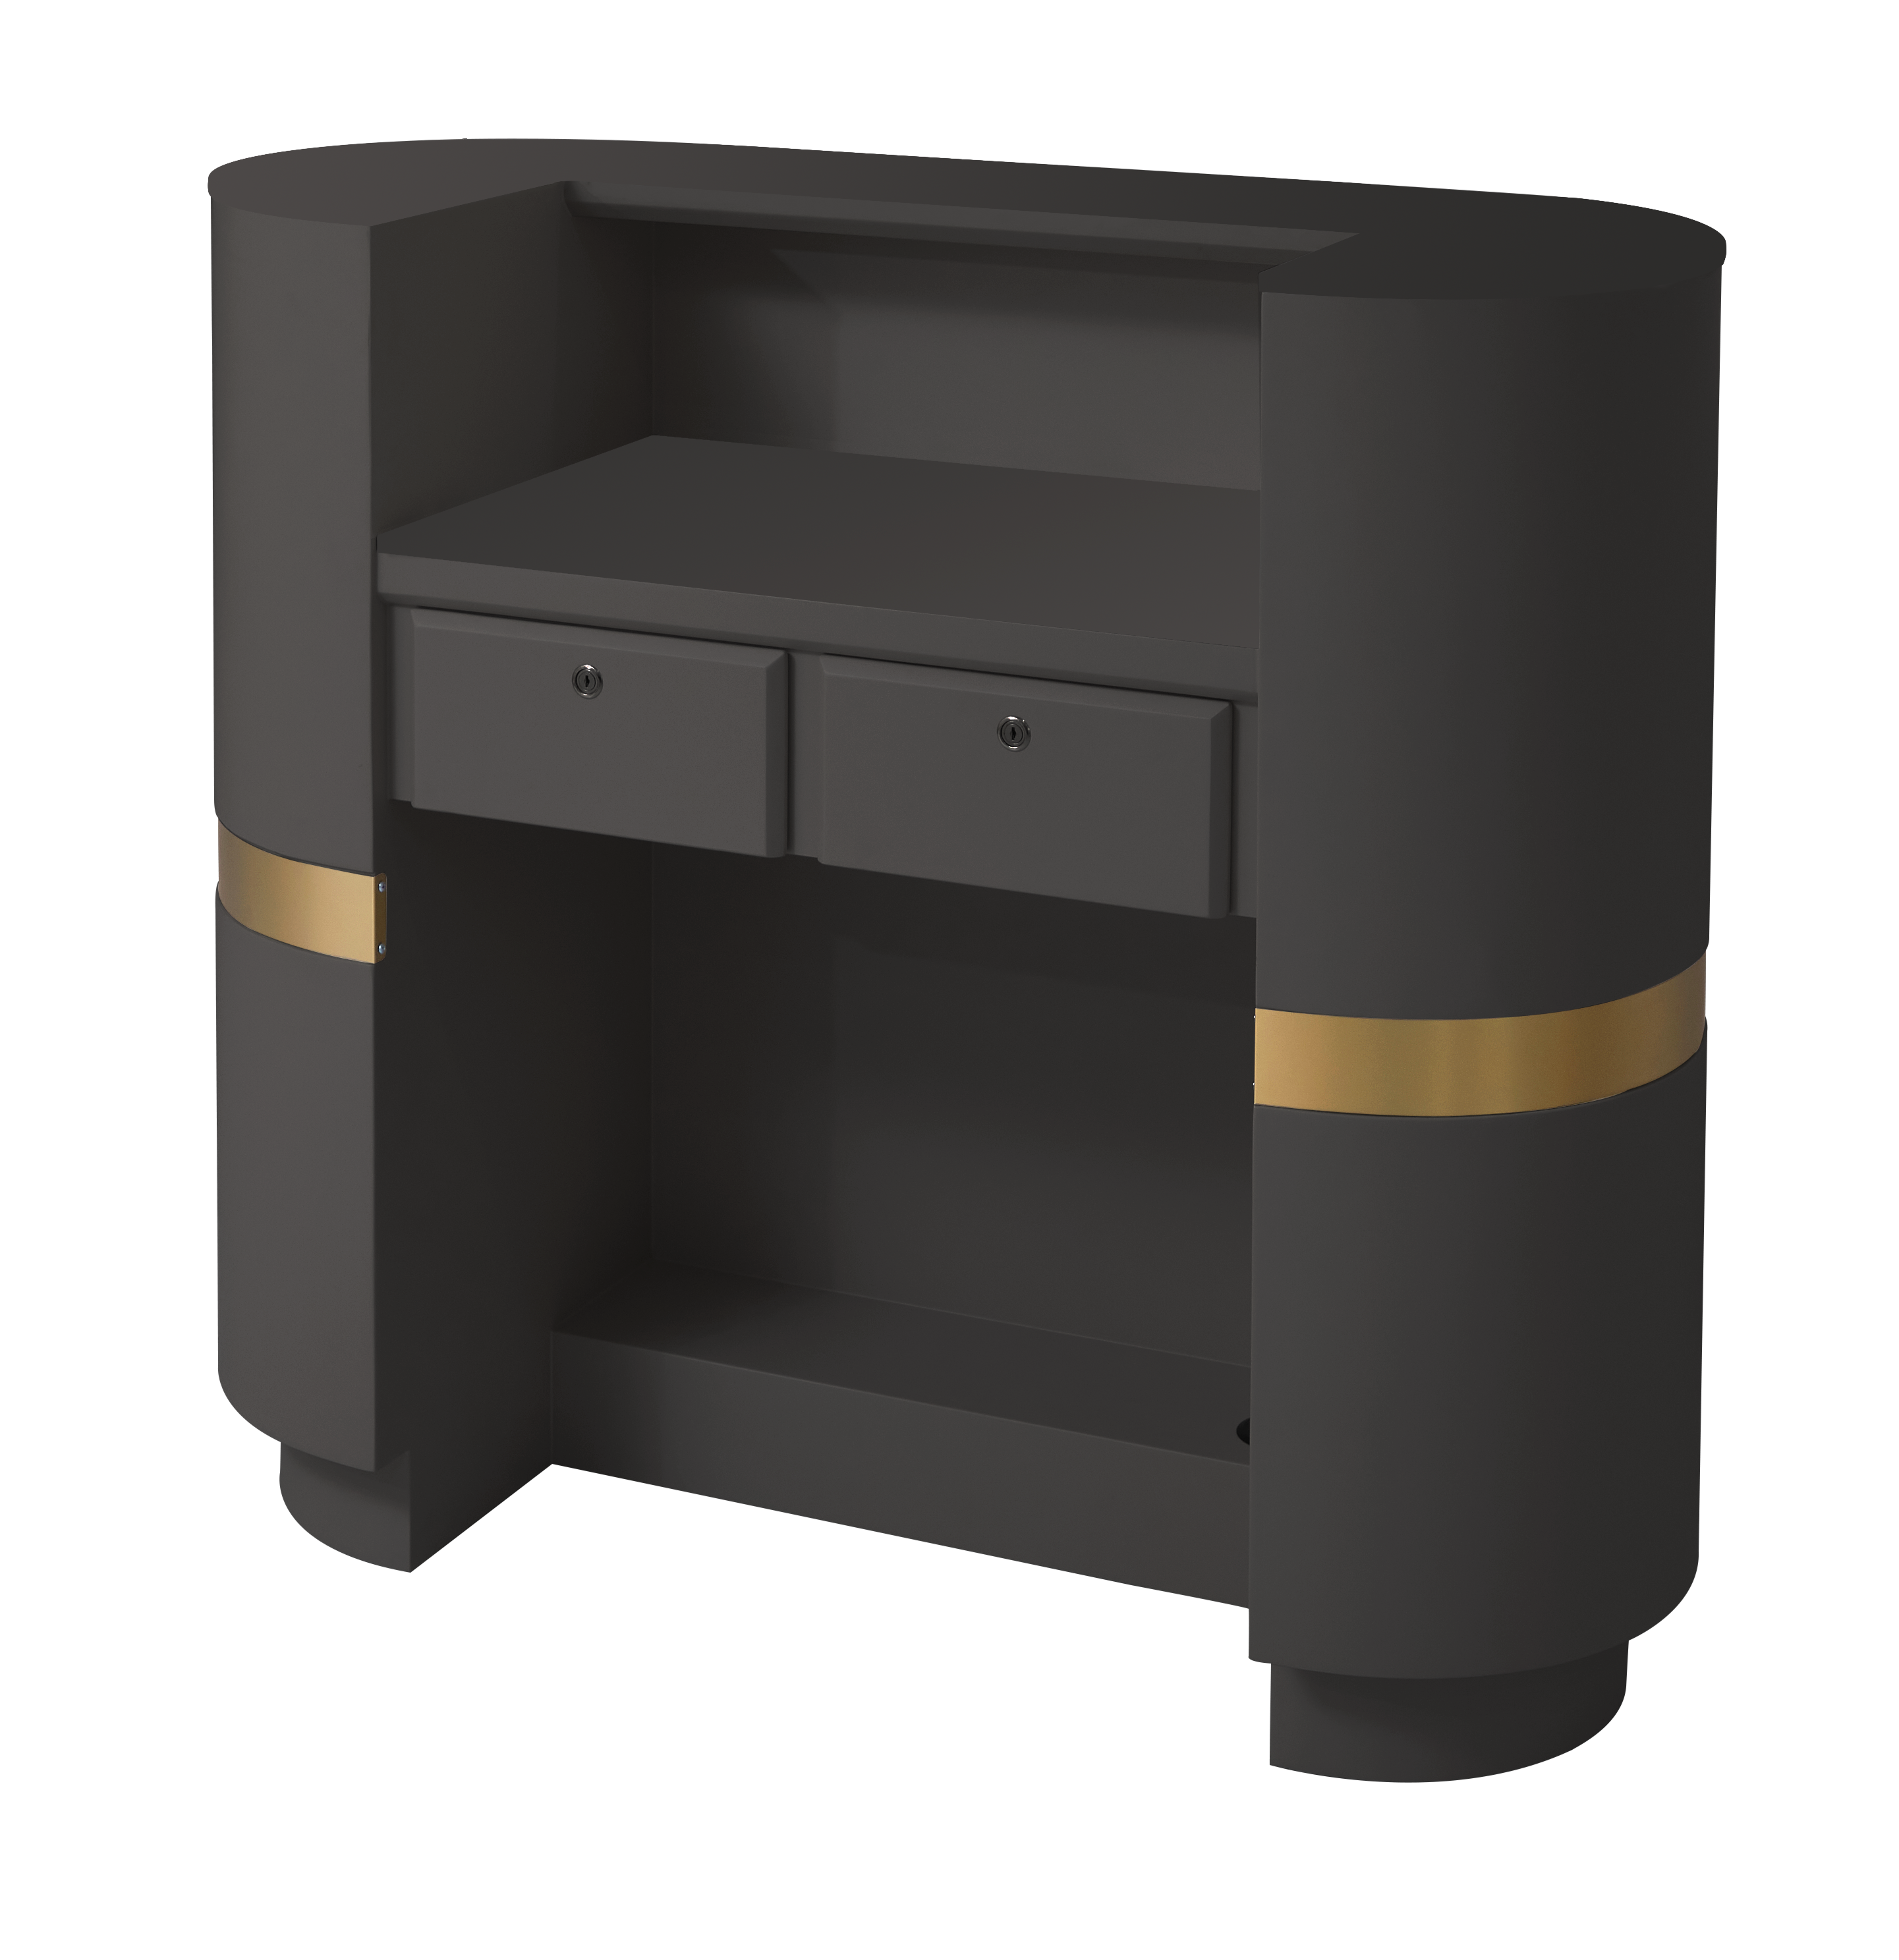 The Coco Desk - Charcoal Black & Gold with Painted Top by SEC